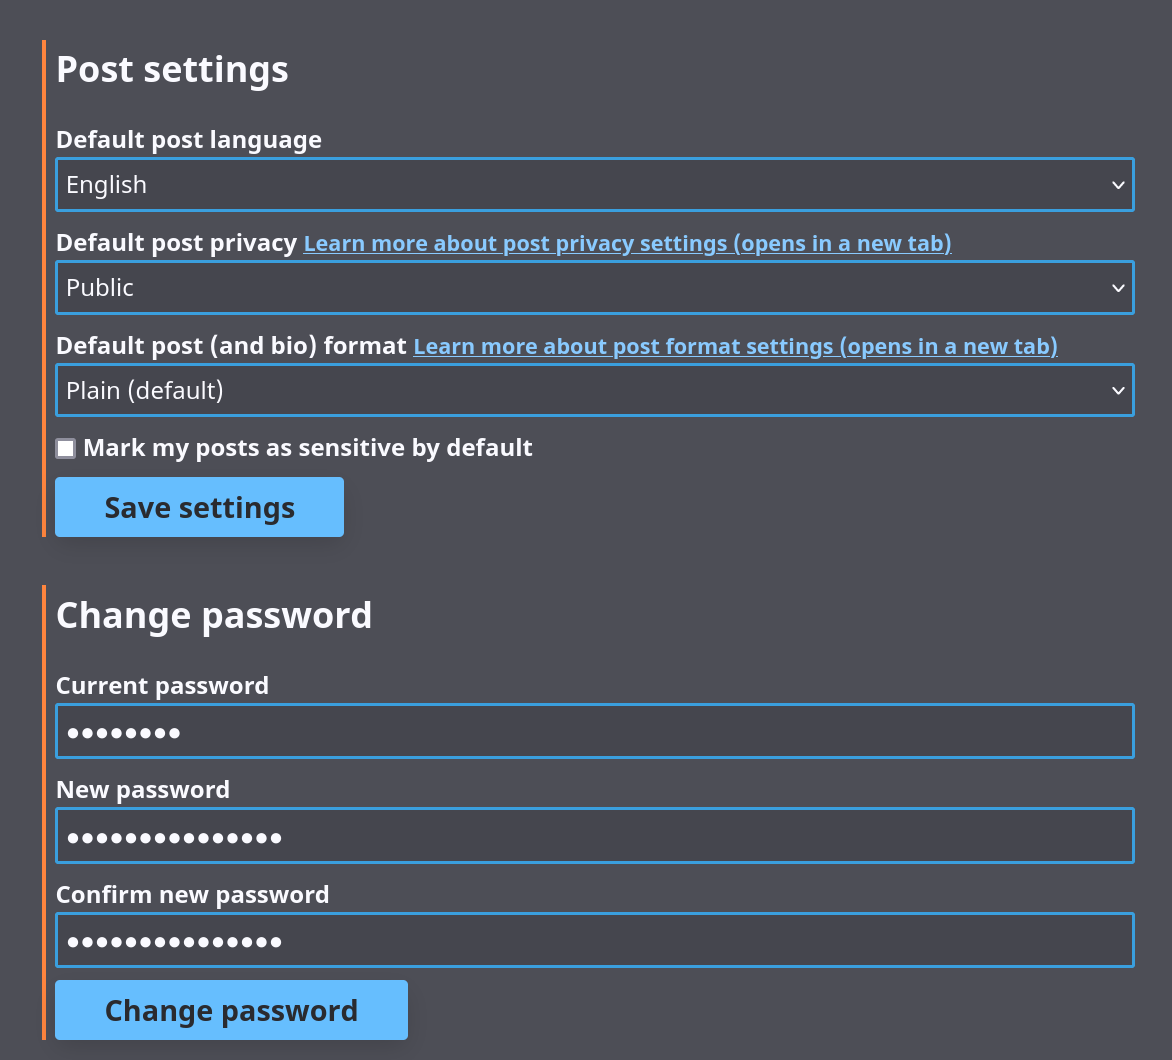 Screenshot of the Post Settings section of the User Settings Panel